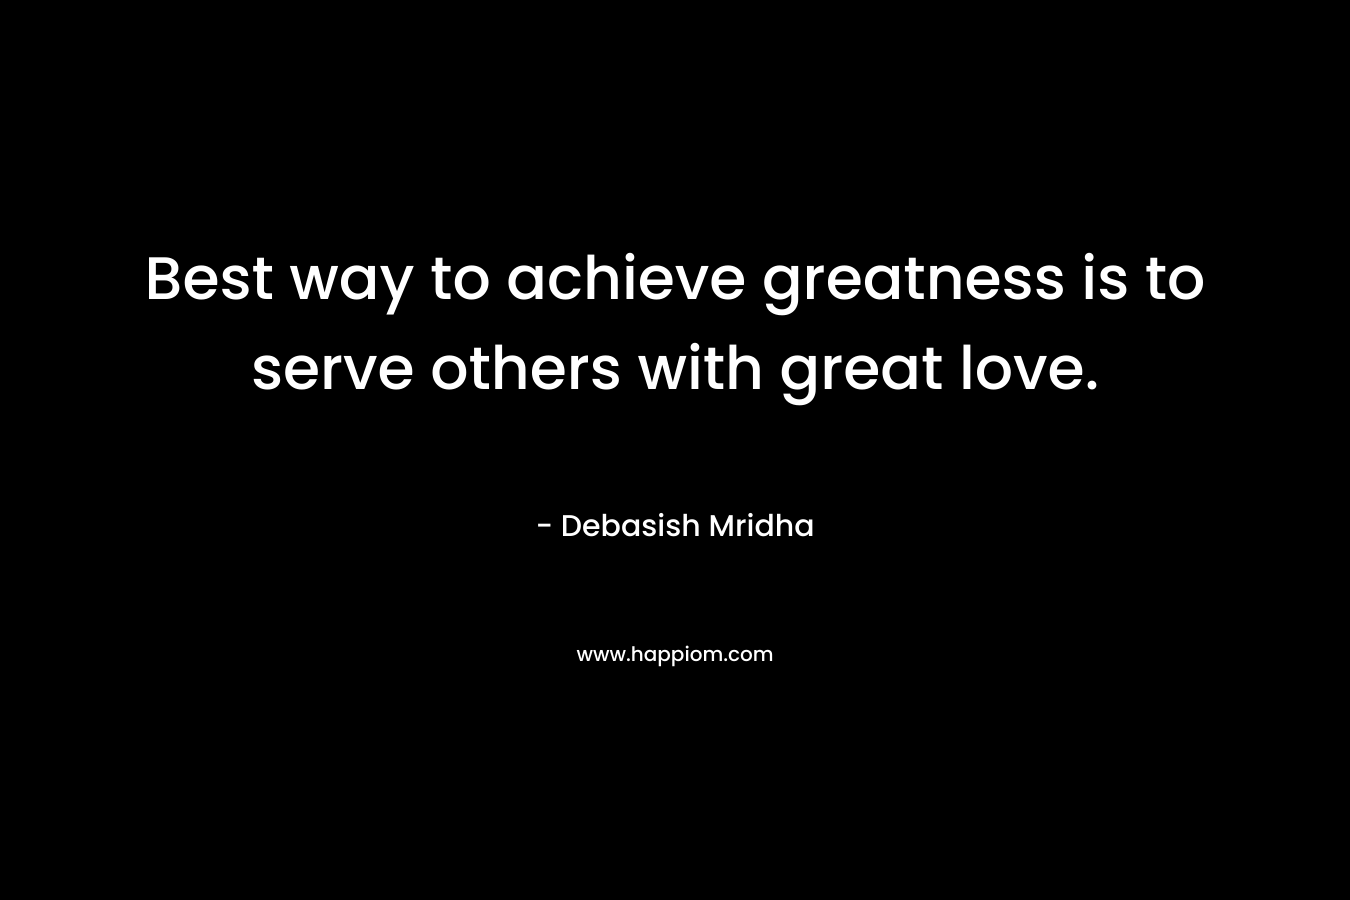 Best way to achieve greatness is to serve others with great love.